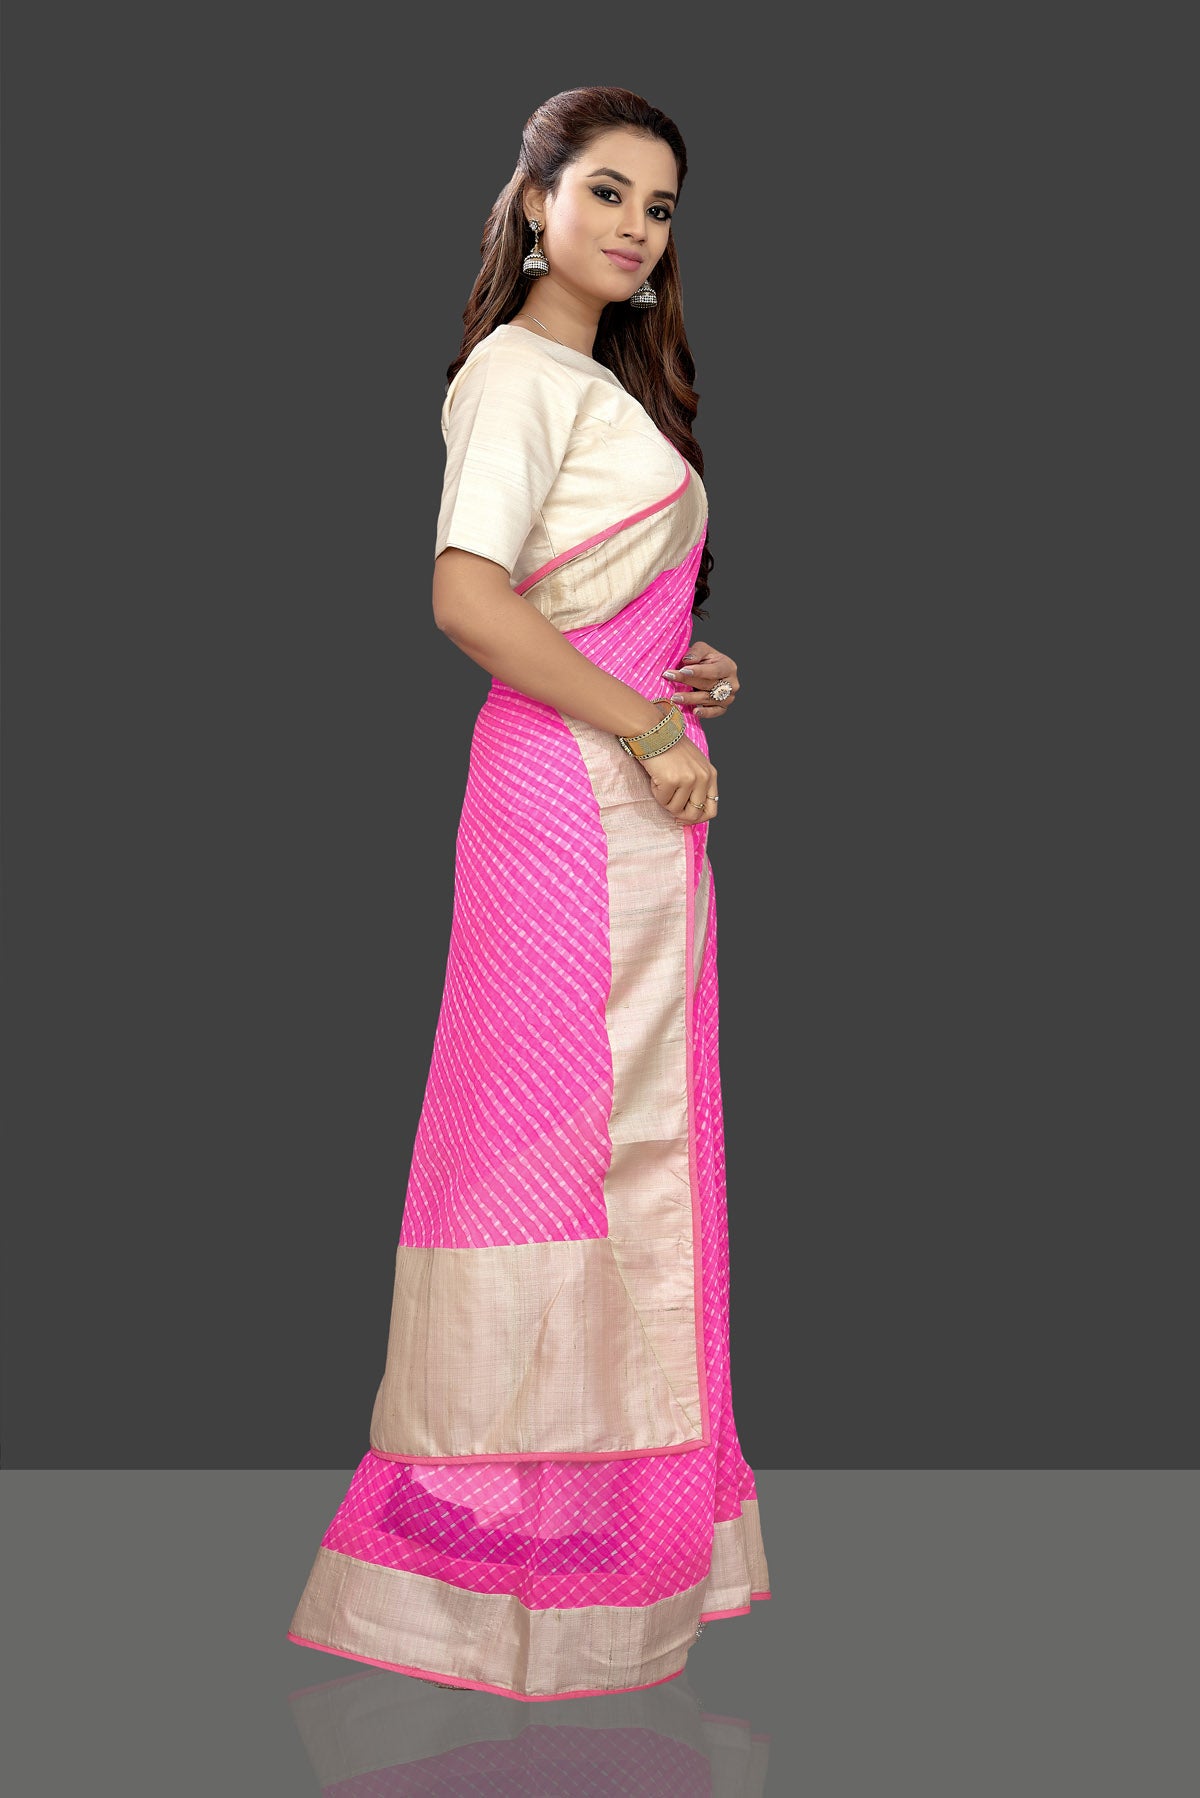 Buy gorgeous pink leheriya print chiffon saree online in USA with cream saree blouse. Shop stunning designer sarees, handwoven sarees, embroidered sarees, printed sarees, pure silk sarees in latest designs from Pure Elegance Indian fashion boutique in USA.-side